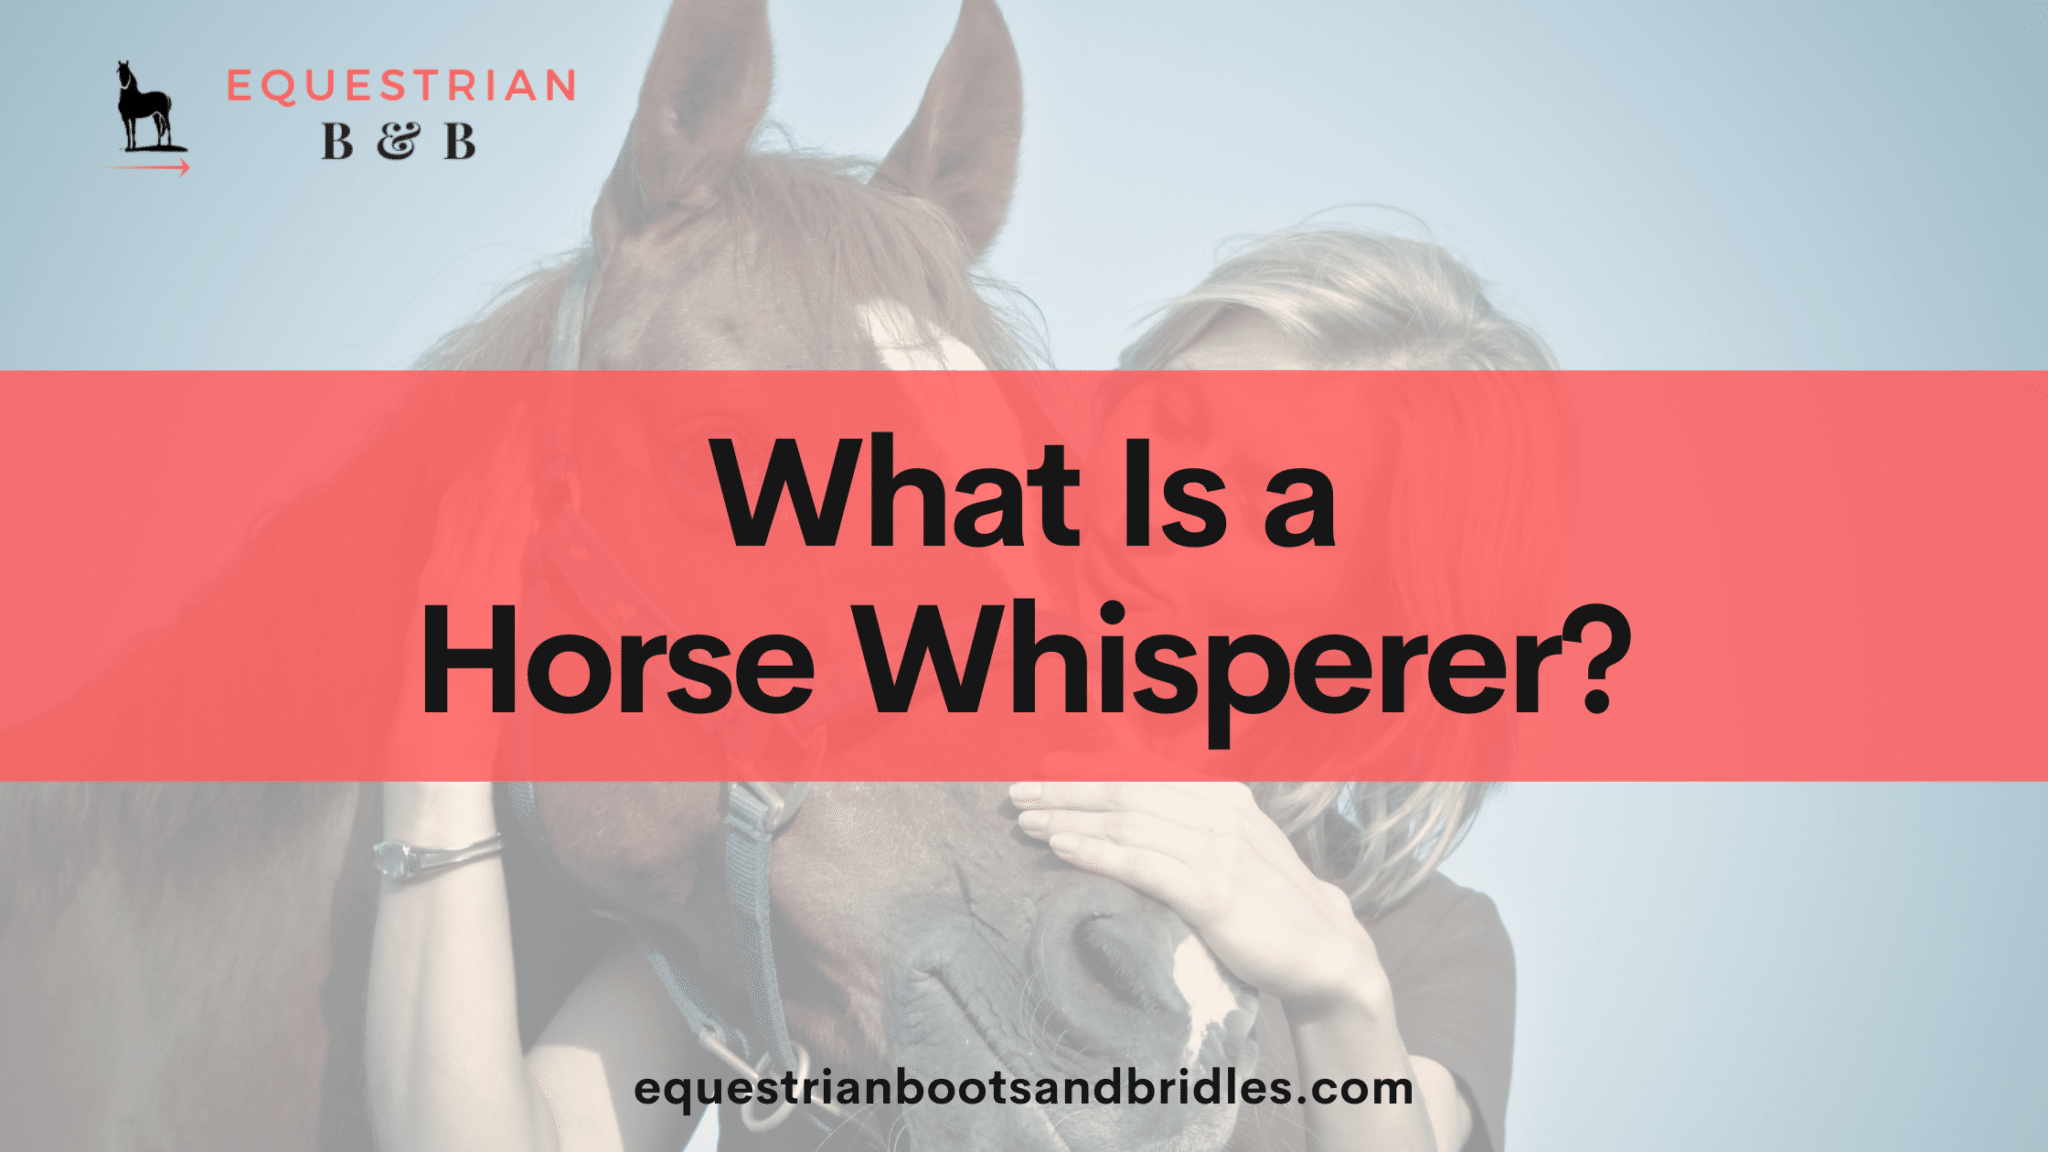 What is a horse whisperer on equestrianbootsandbridles.com